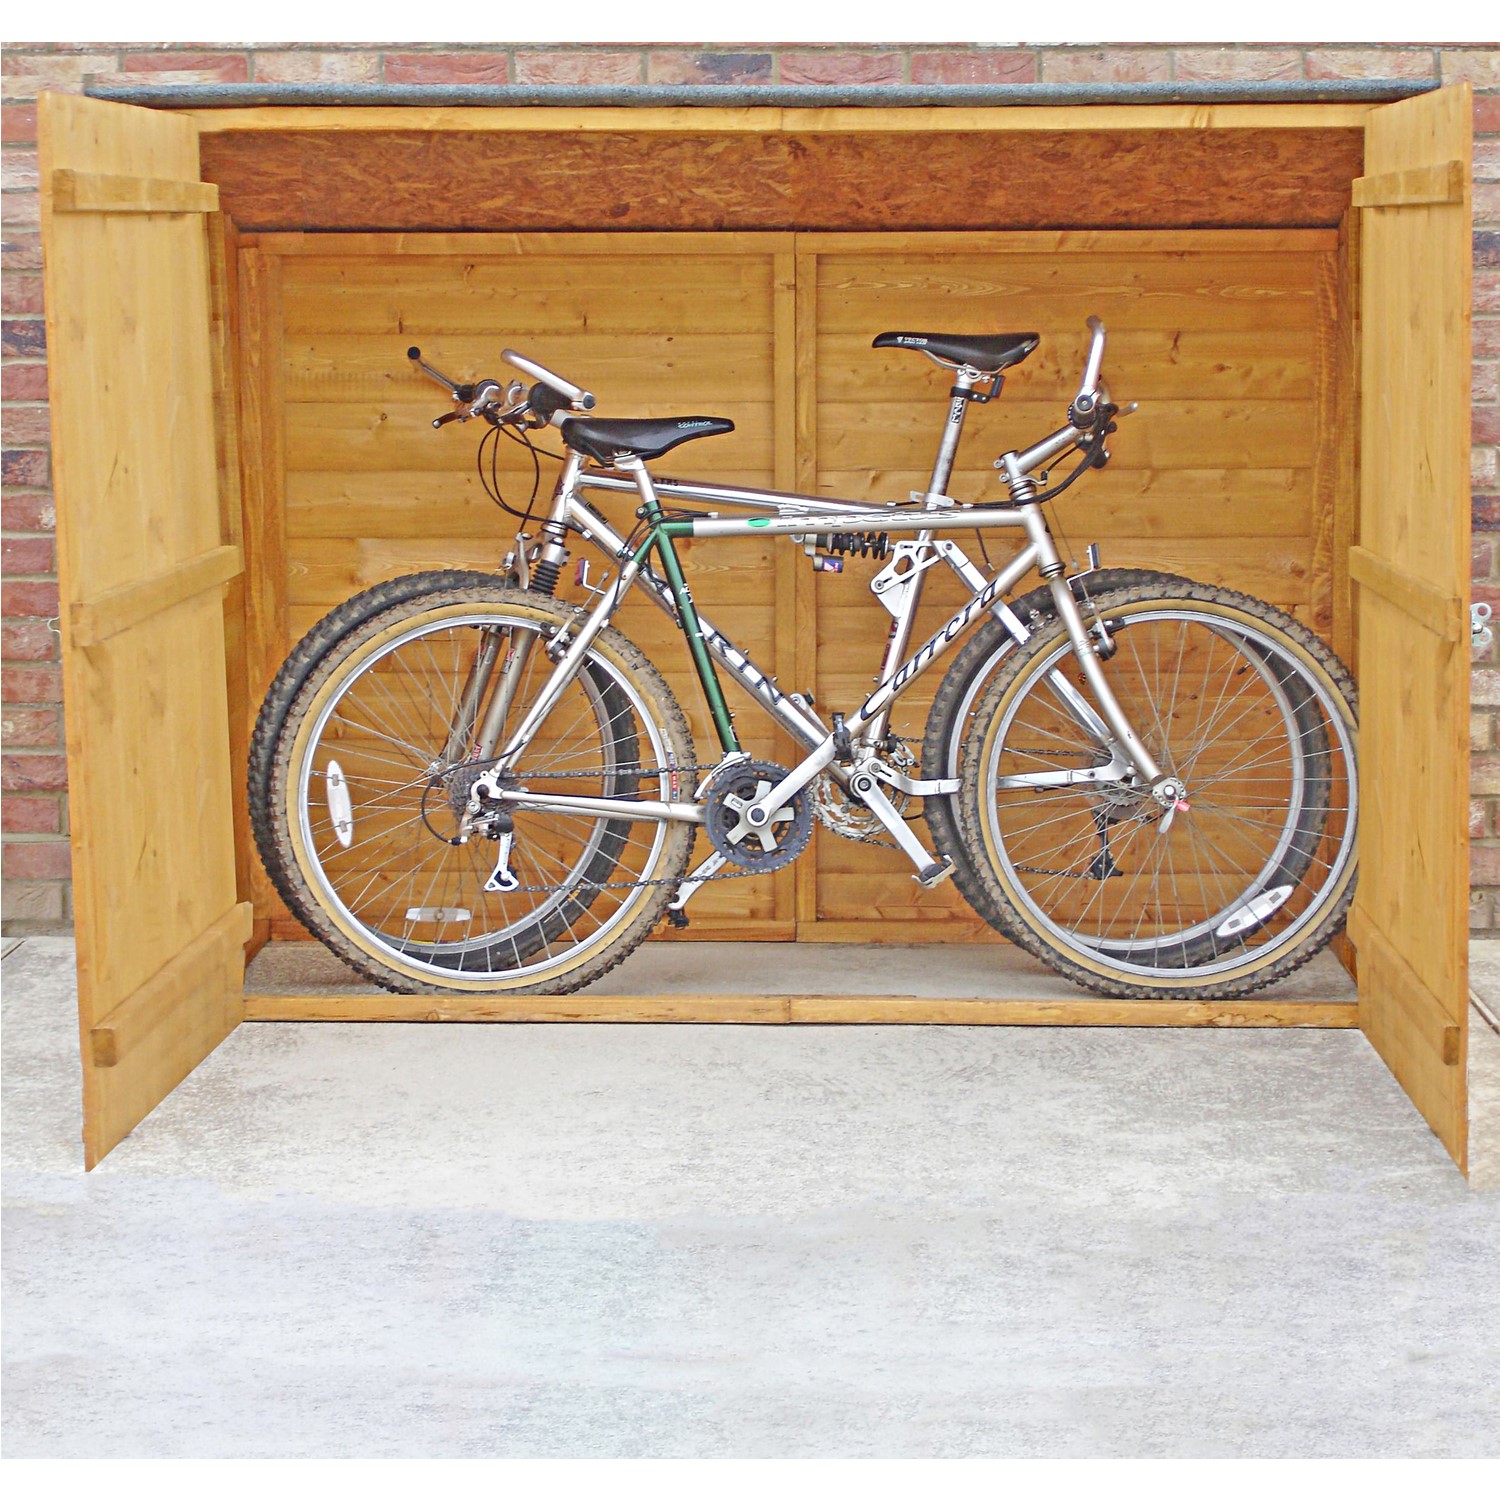 Read more about Shire pent roof double door bike store